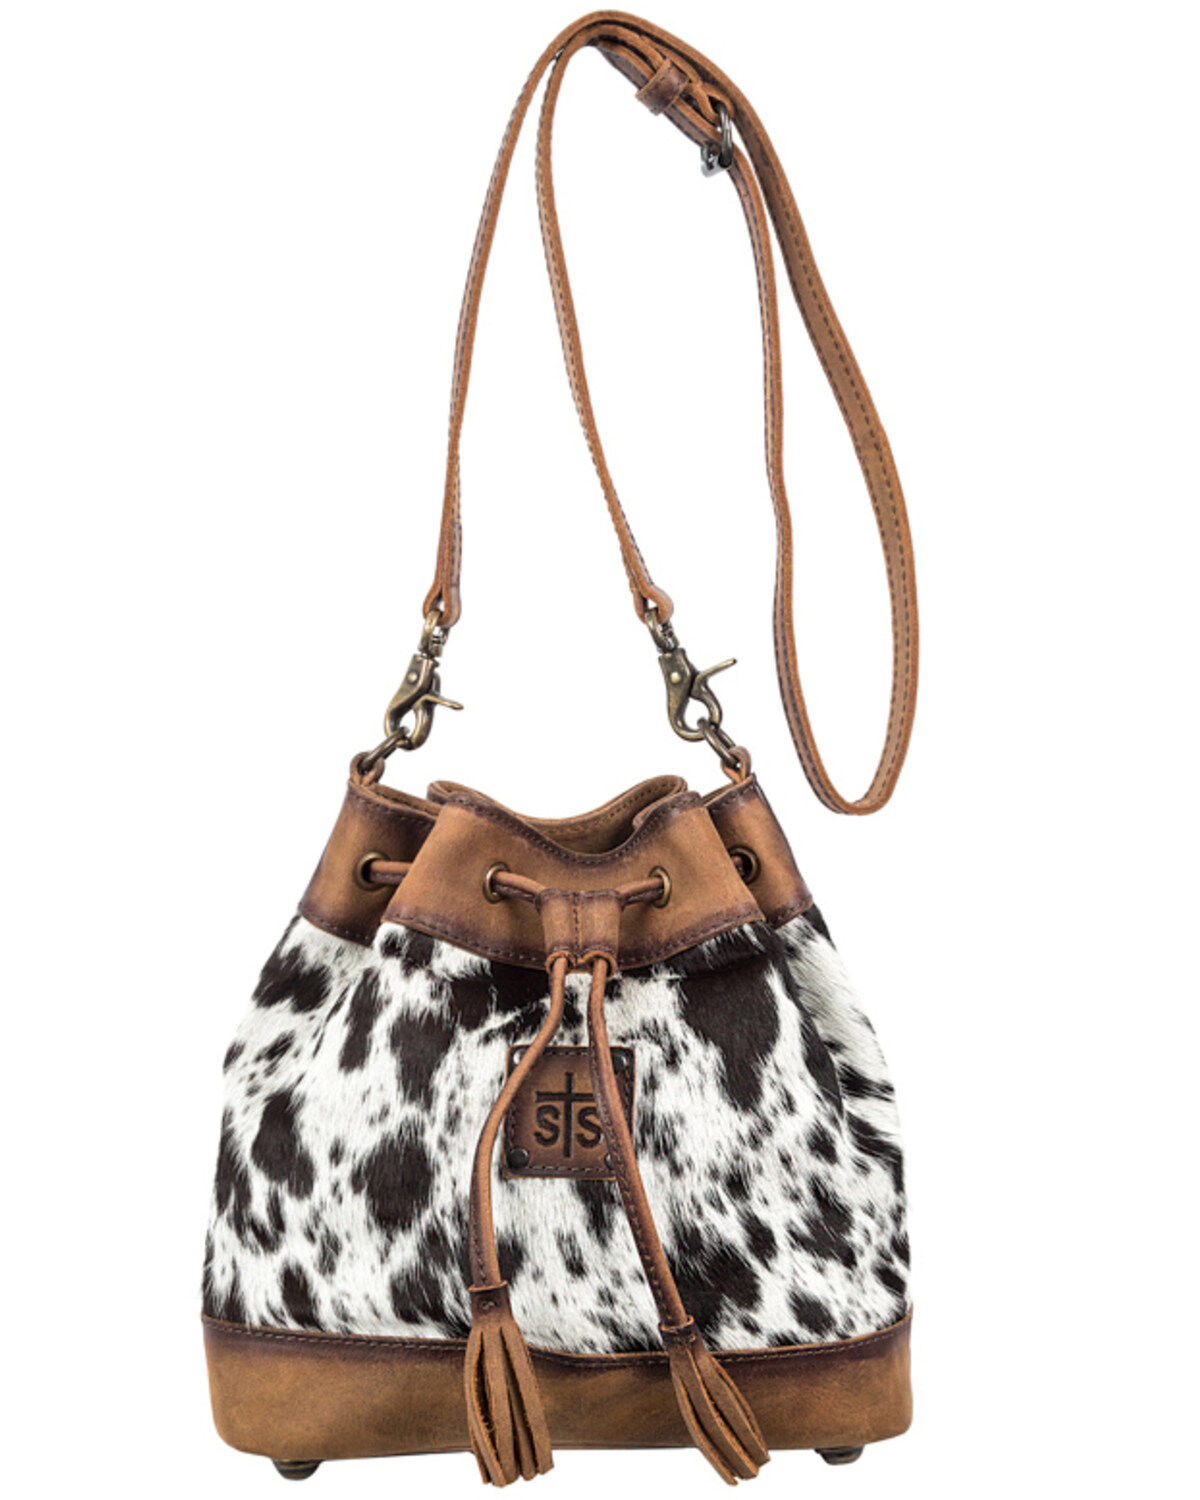 cowhide leather western style cowhide purse leather handbag cowhide handbag western purse, shoulder bag cowhide leather bag cowhide